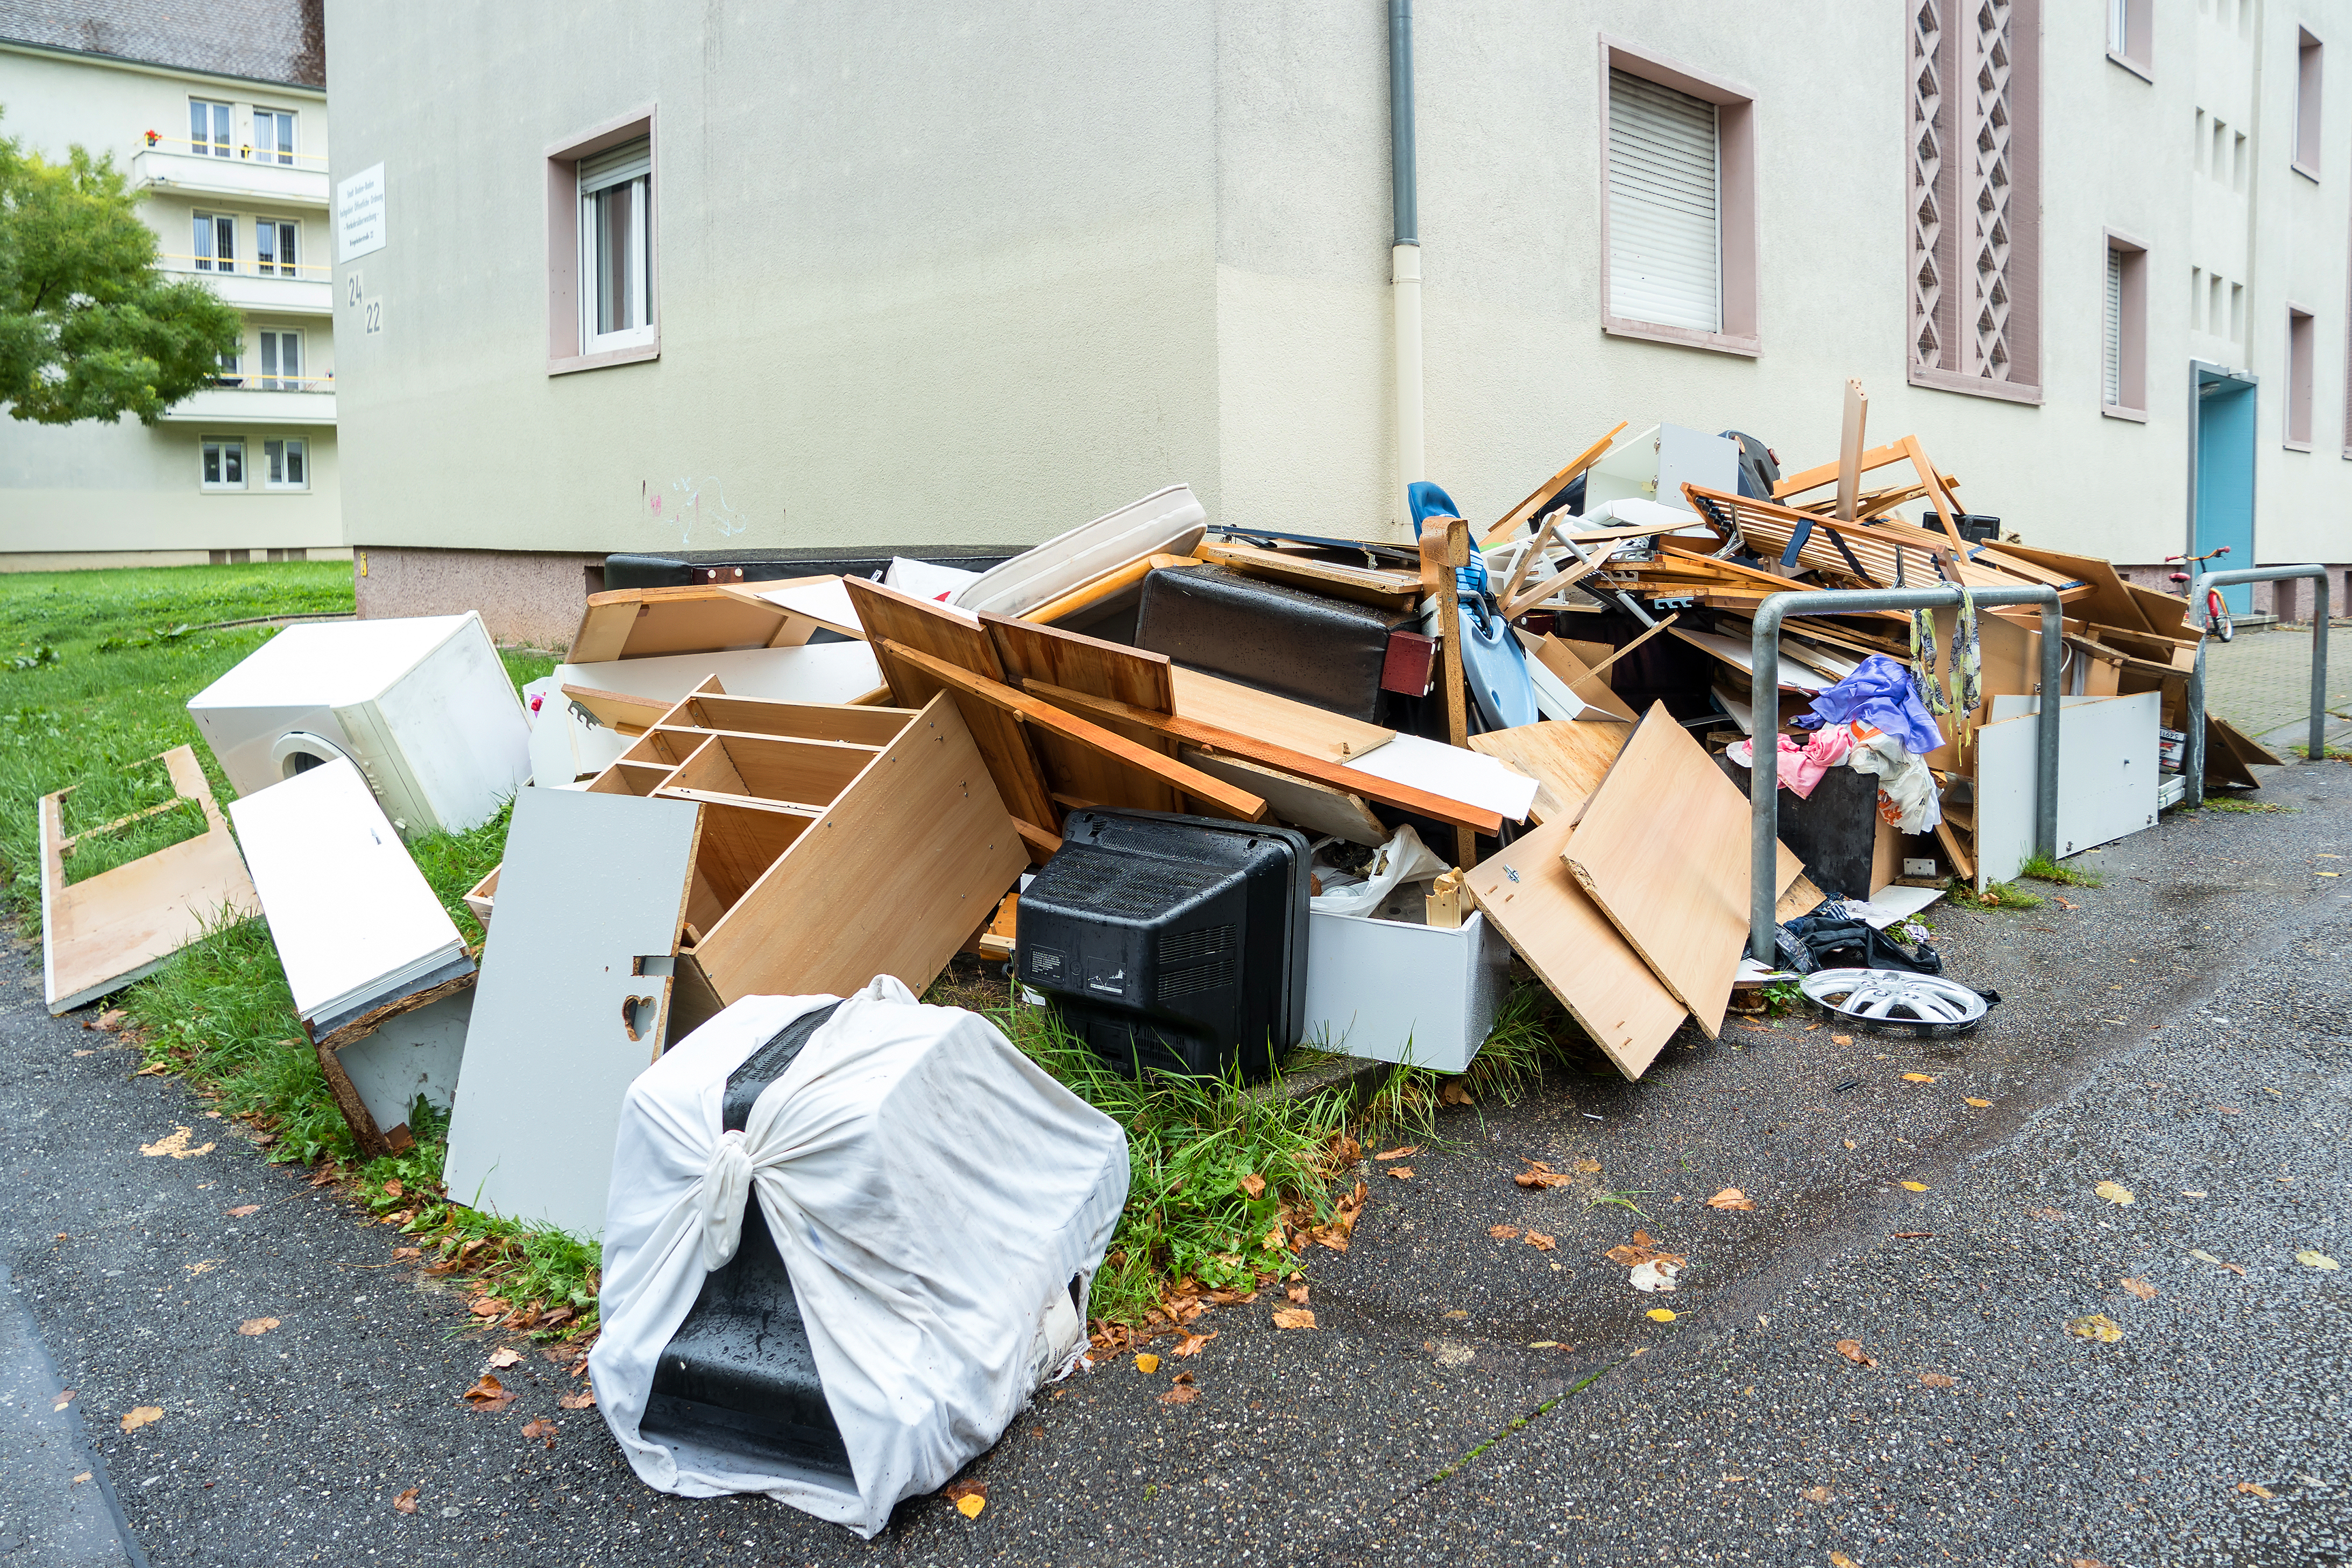 5 Reasons to Rent a Dumpster in The Winter